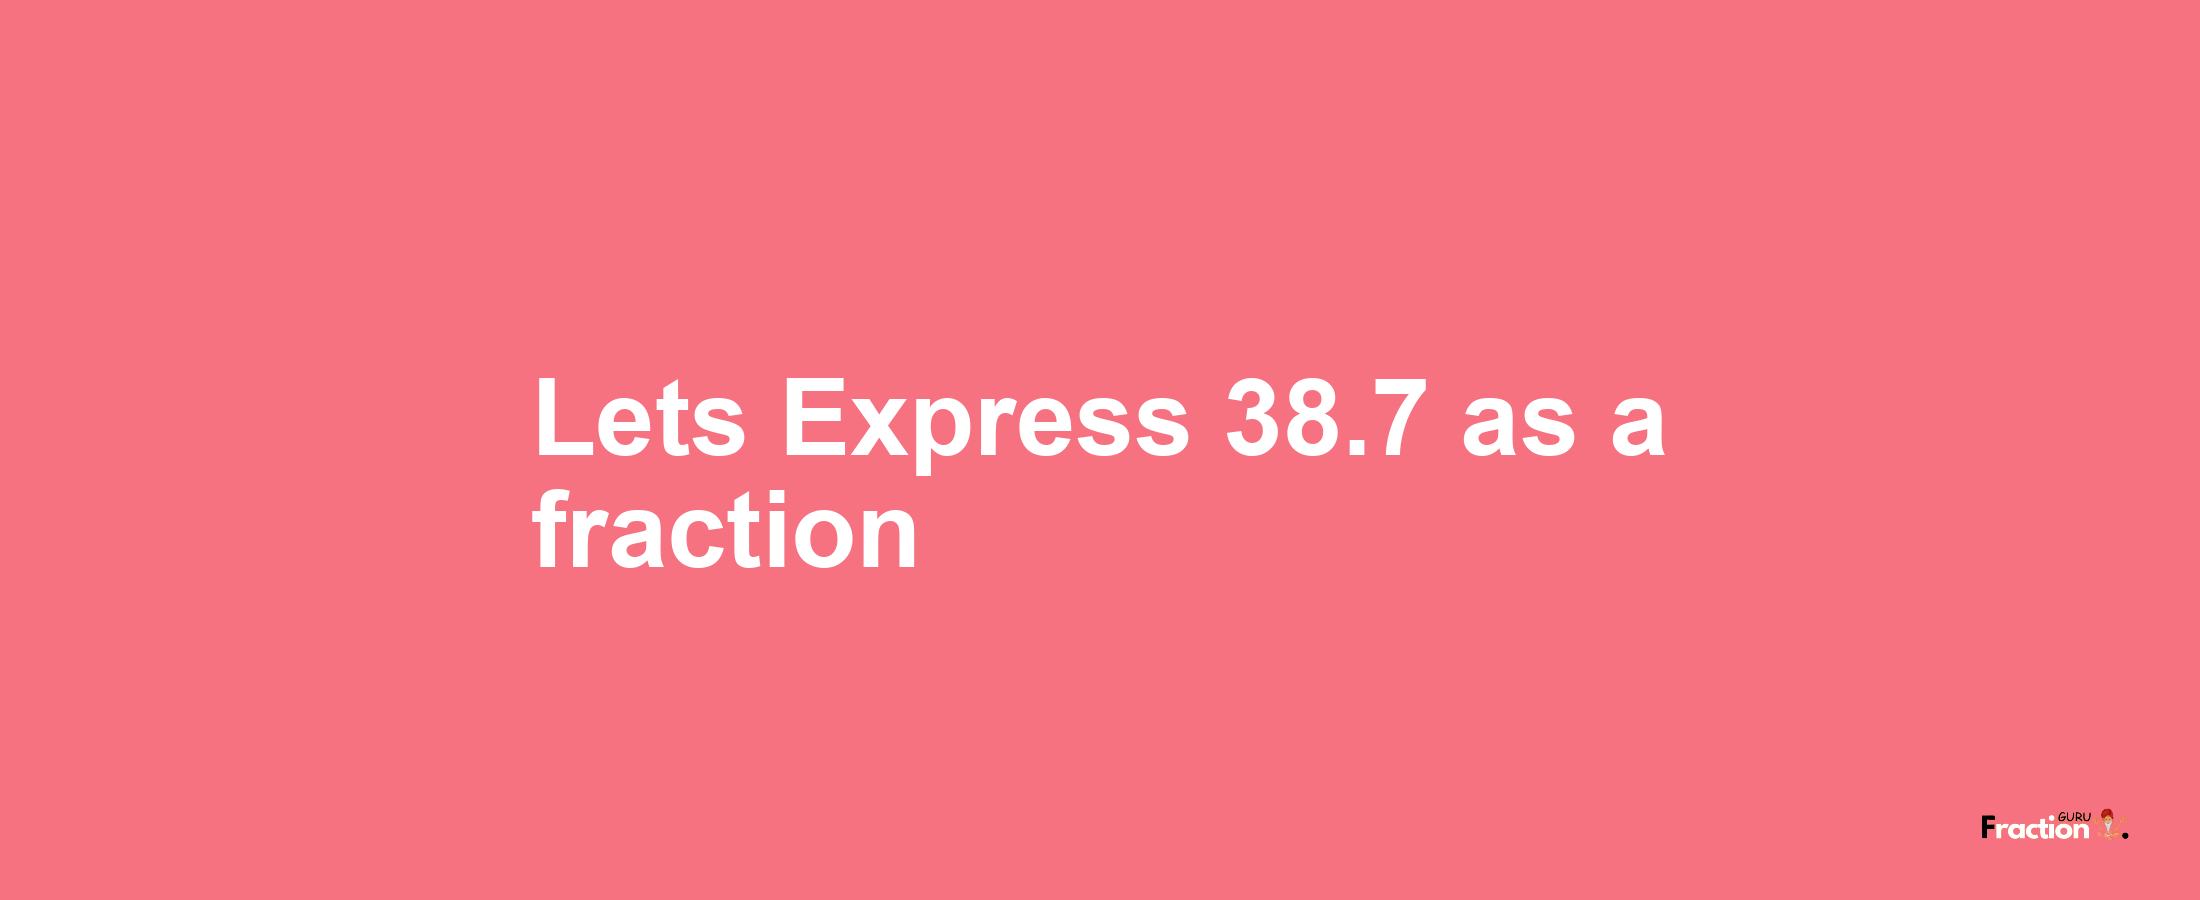 Lets Express 38.7 as afraction